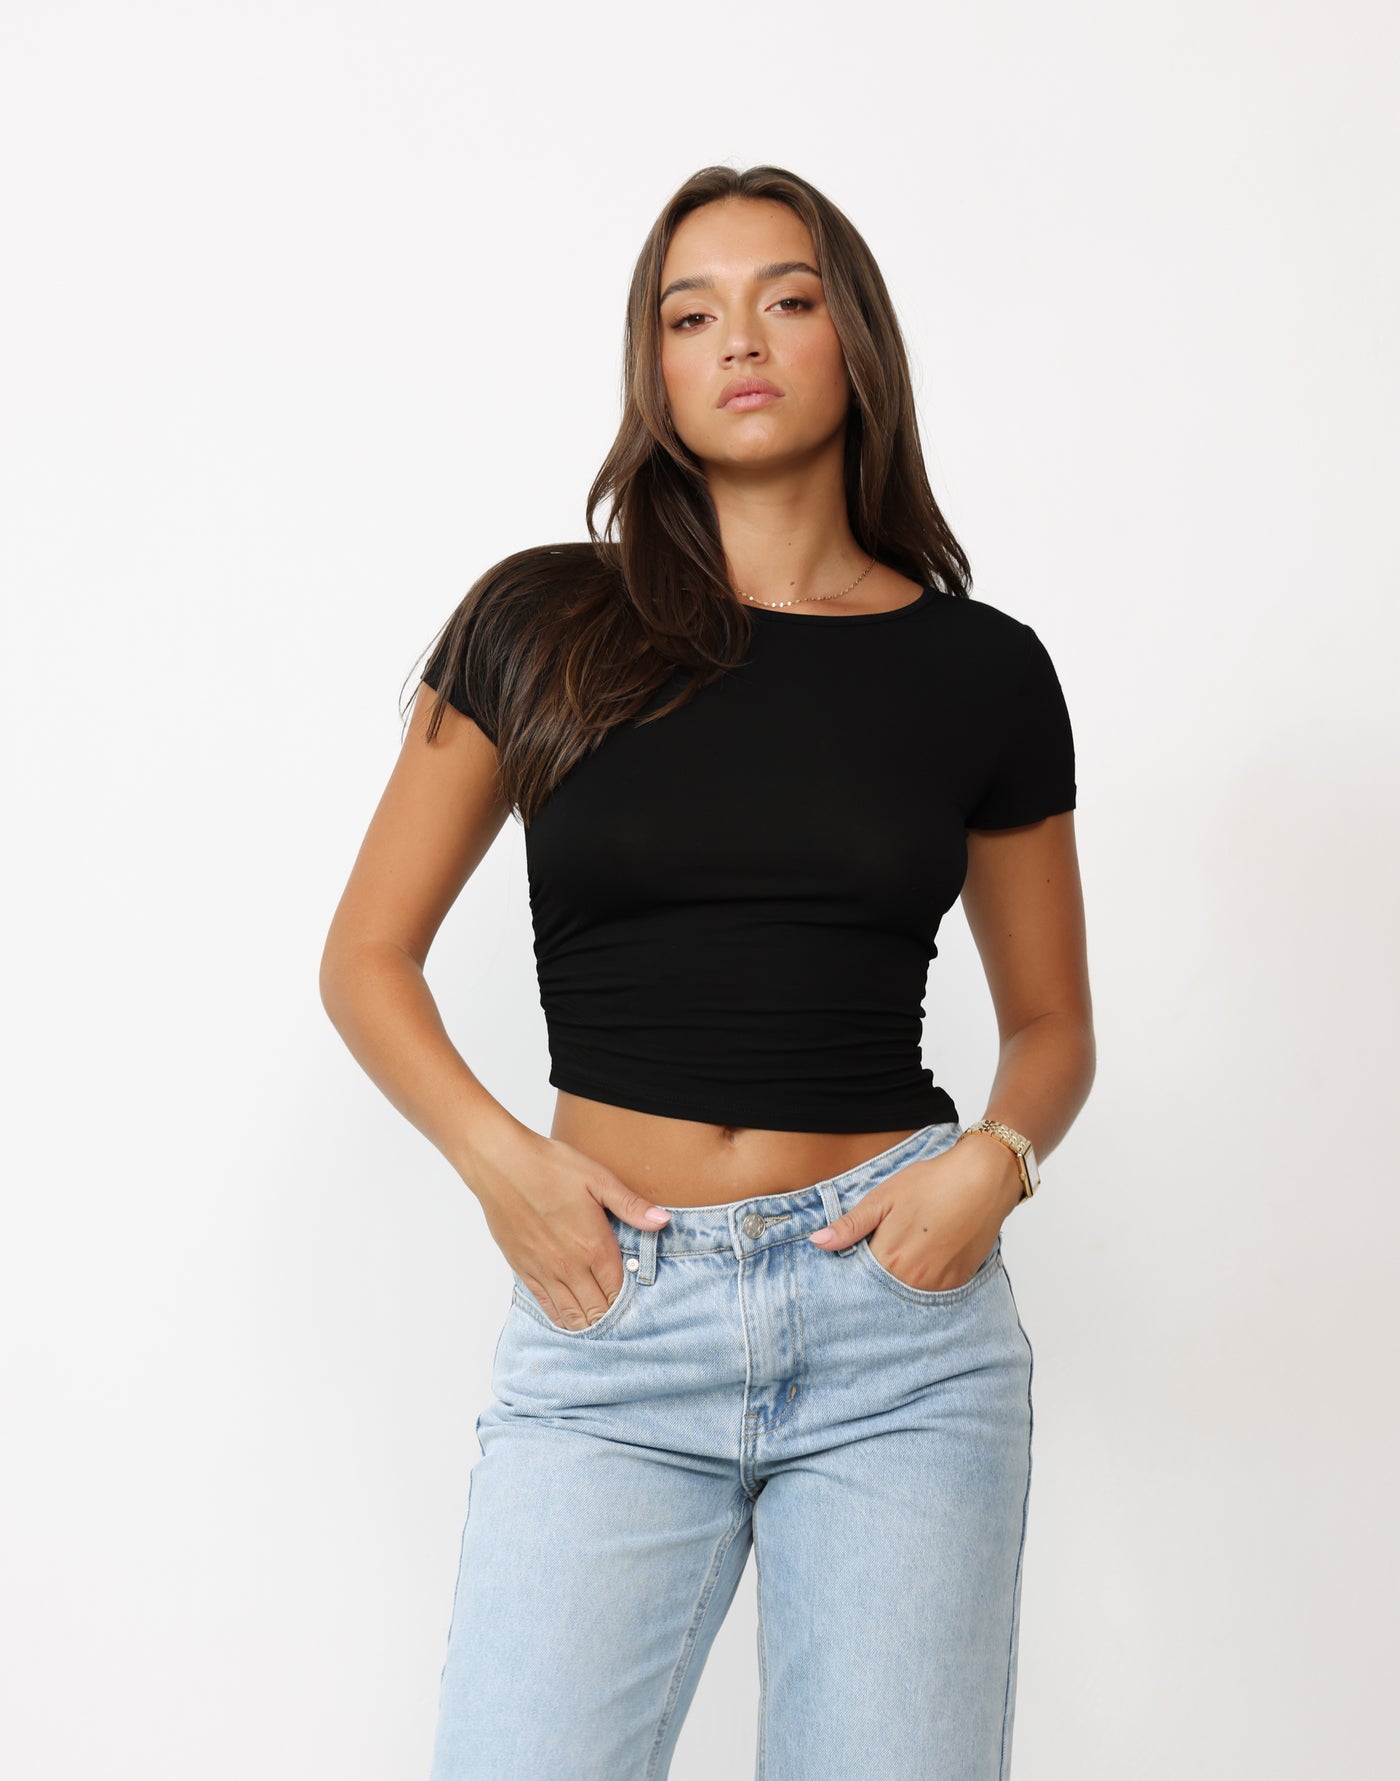 Kristyn Top (Black) - Basic Fitted Short Sleeve Bodycon Top - Women's Top - Charcoal Clothing